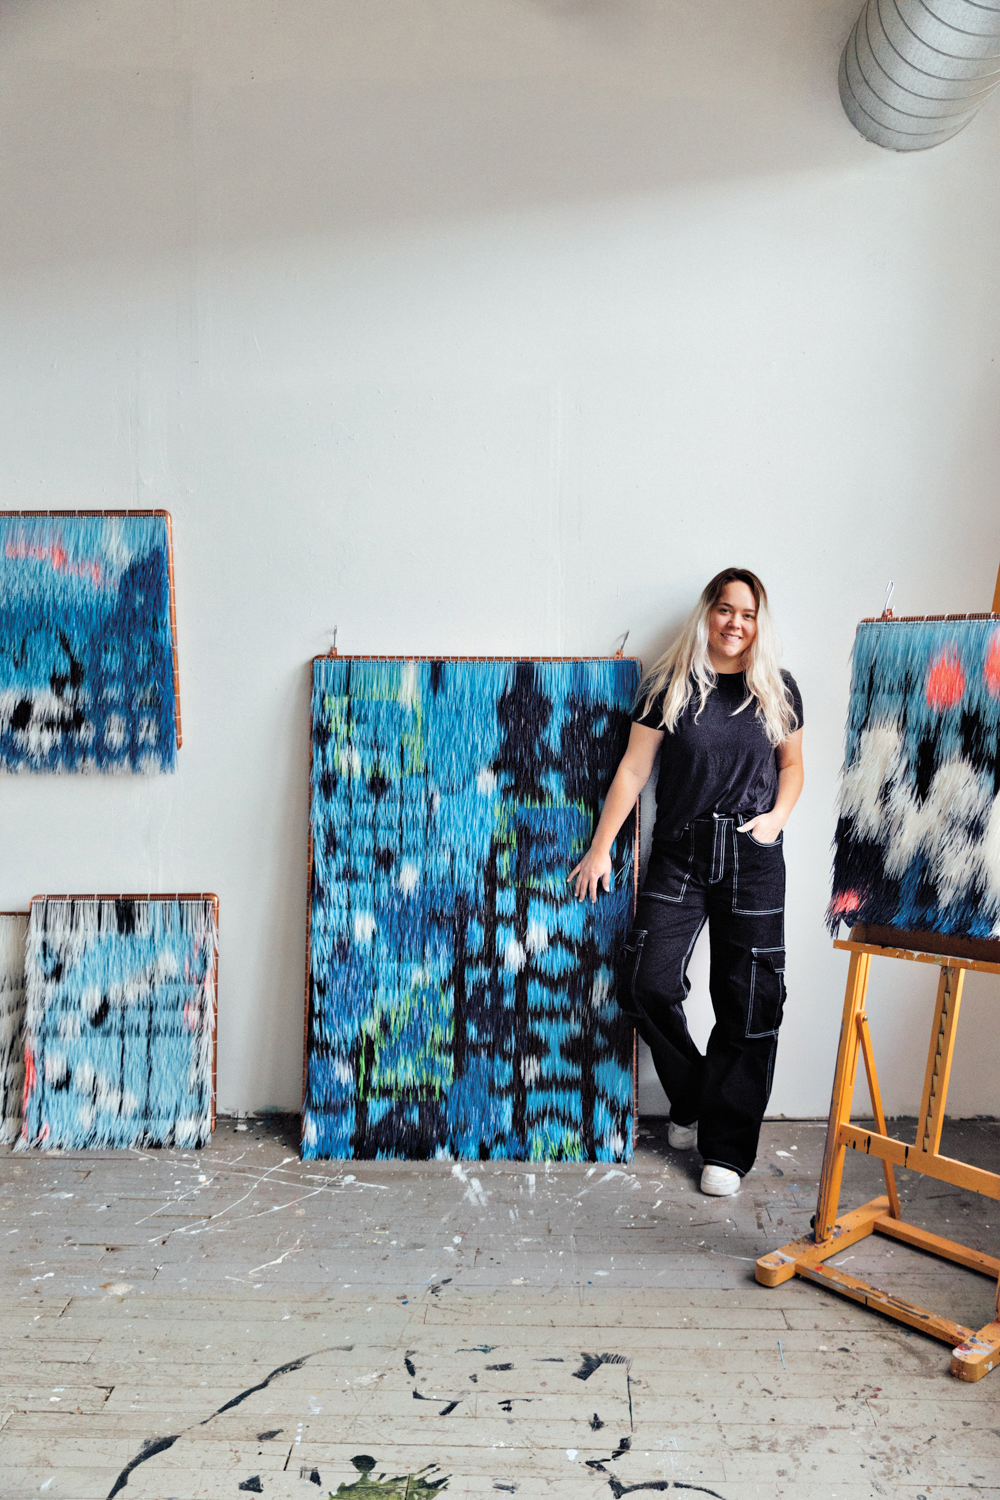 Sarah Leuchtner stands in studio in front of fringed artworks in shades of blue, green and pink